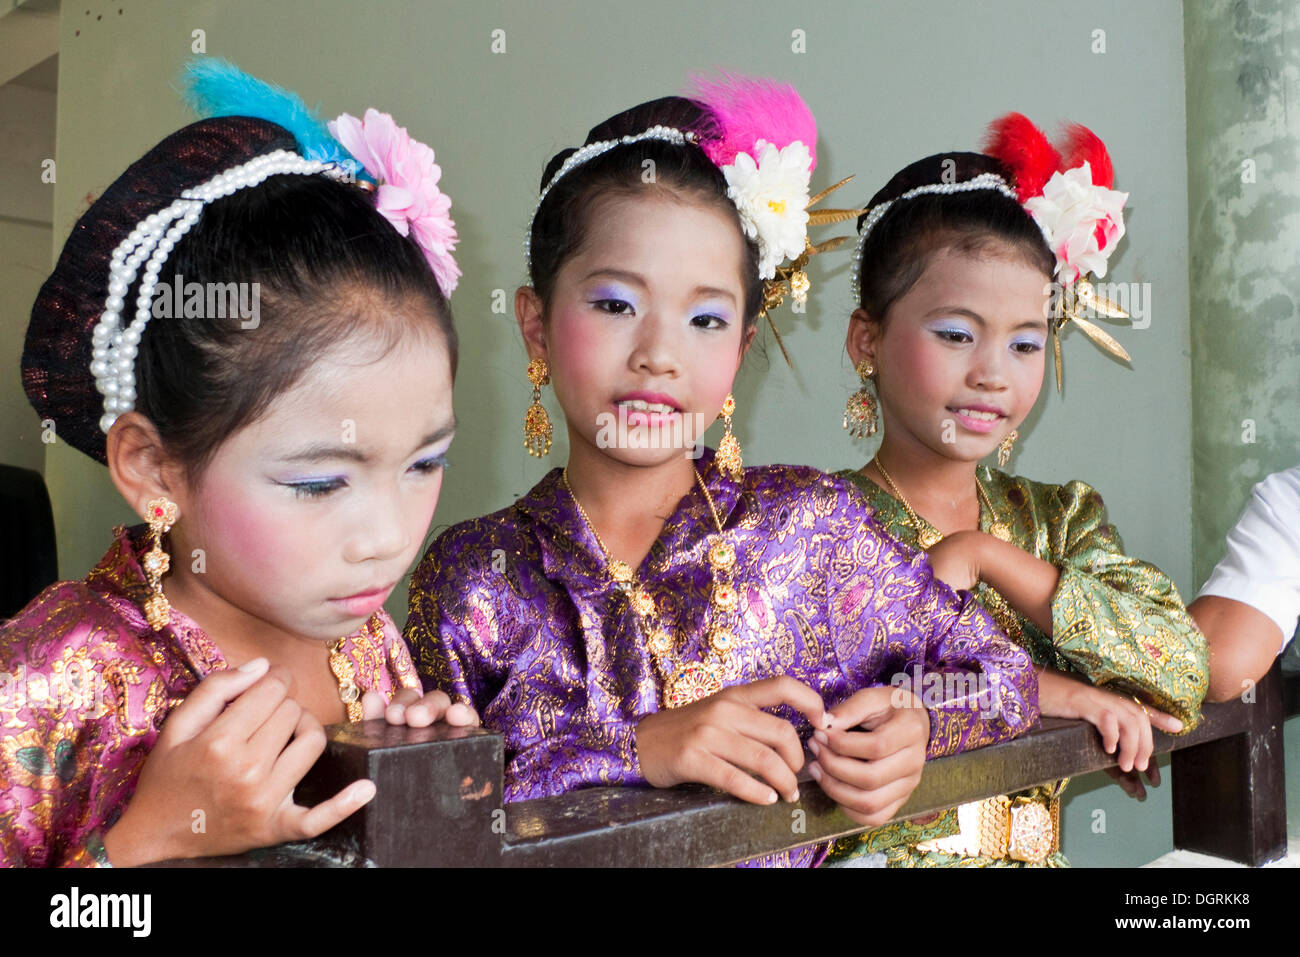 Orphans wearing traditional dance costume, Beluga School for Life, BSfL, an aid project for children in distress in Thailand, Stock Photo